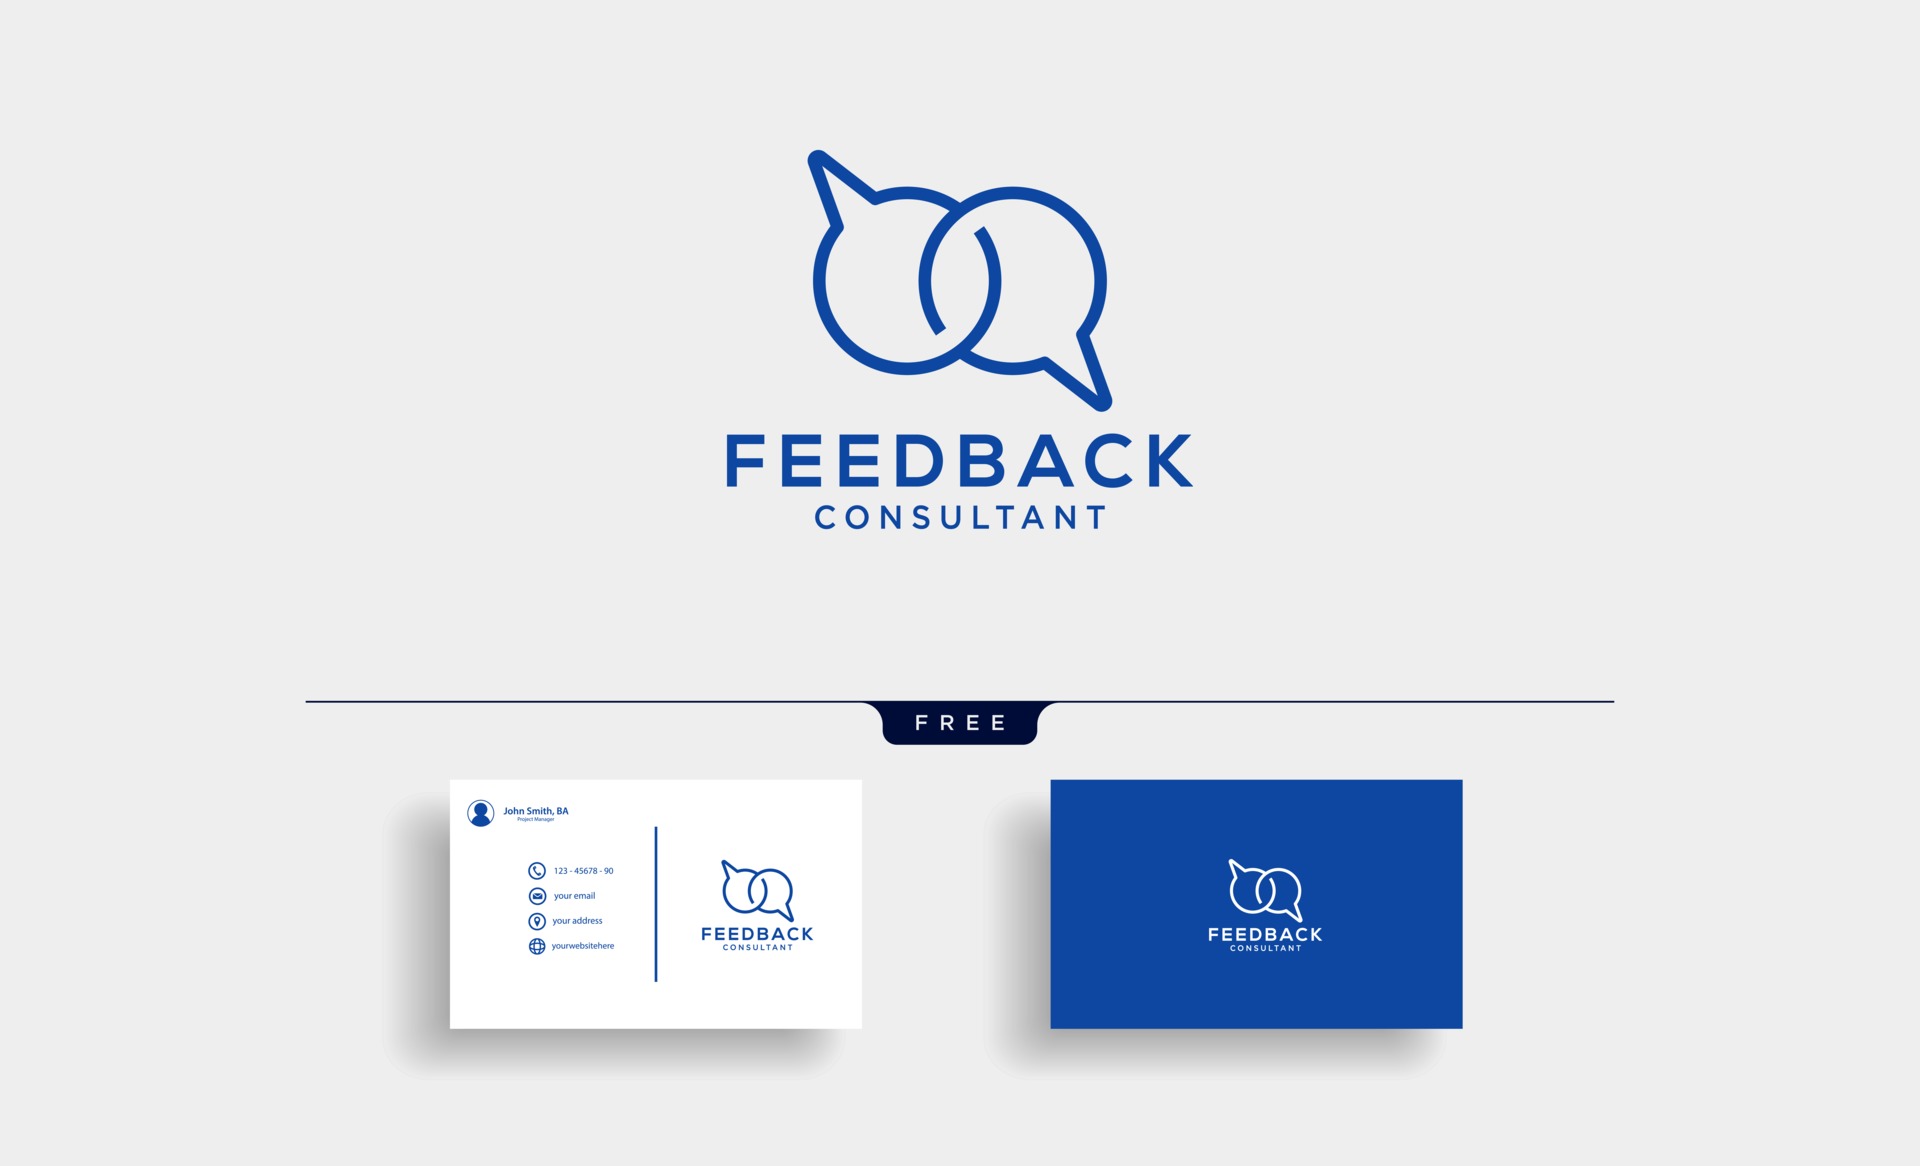 message communication consulting logo template with business card vector illustration icon elements isolated 2413033 vector art at vecteezy